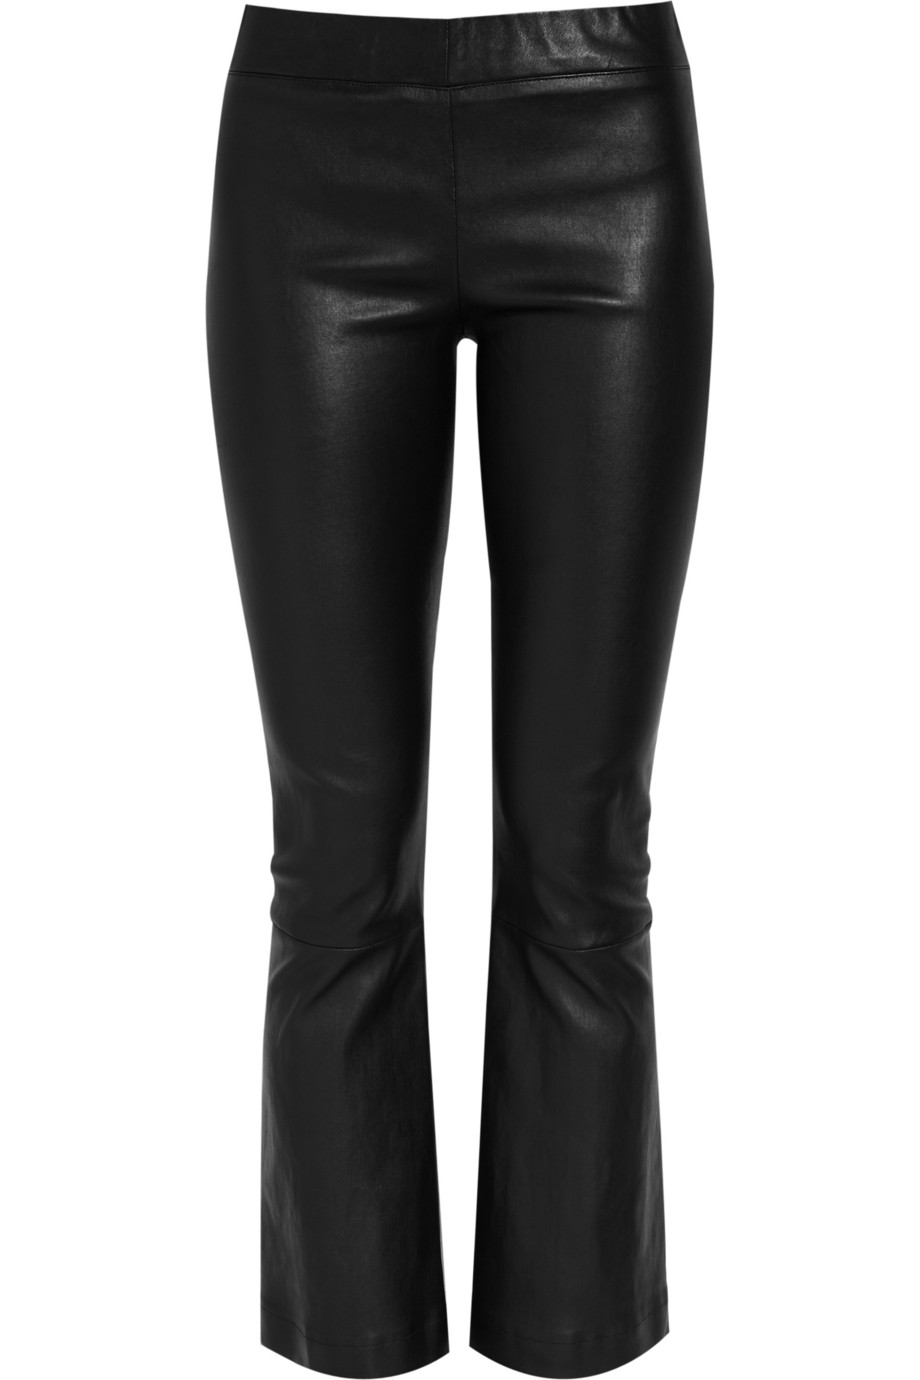 The Row Comet Cropped Leather Pants in Black - Lyst